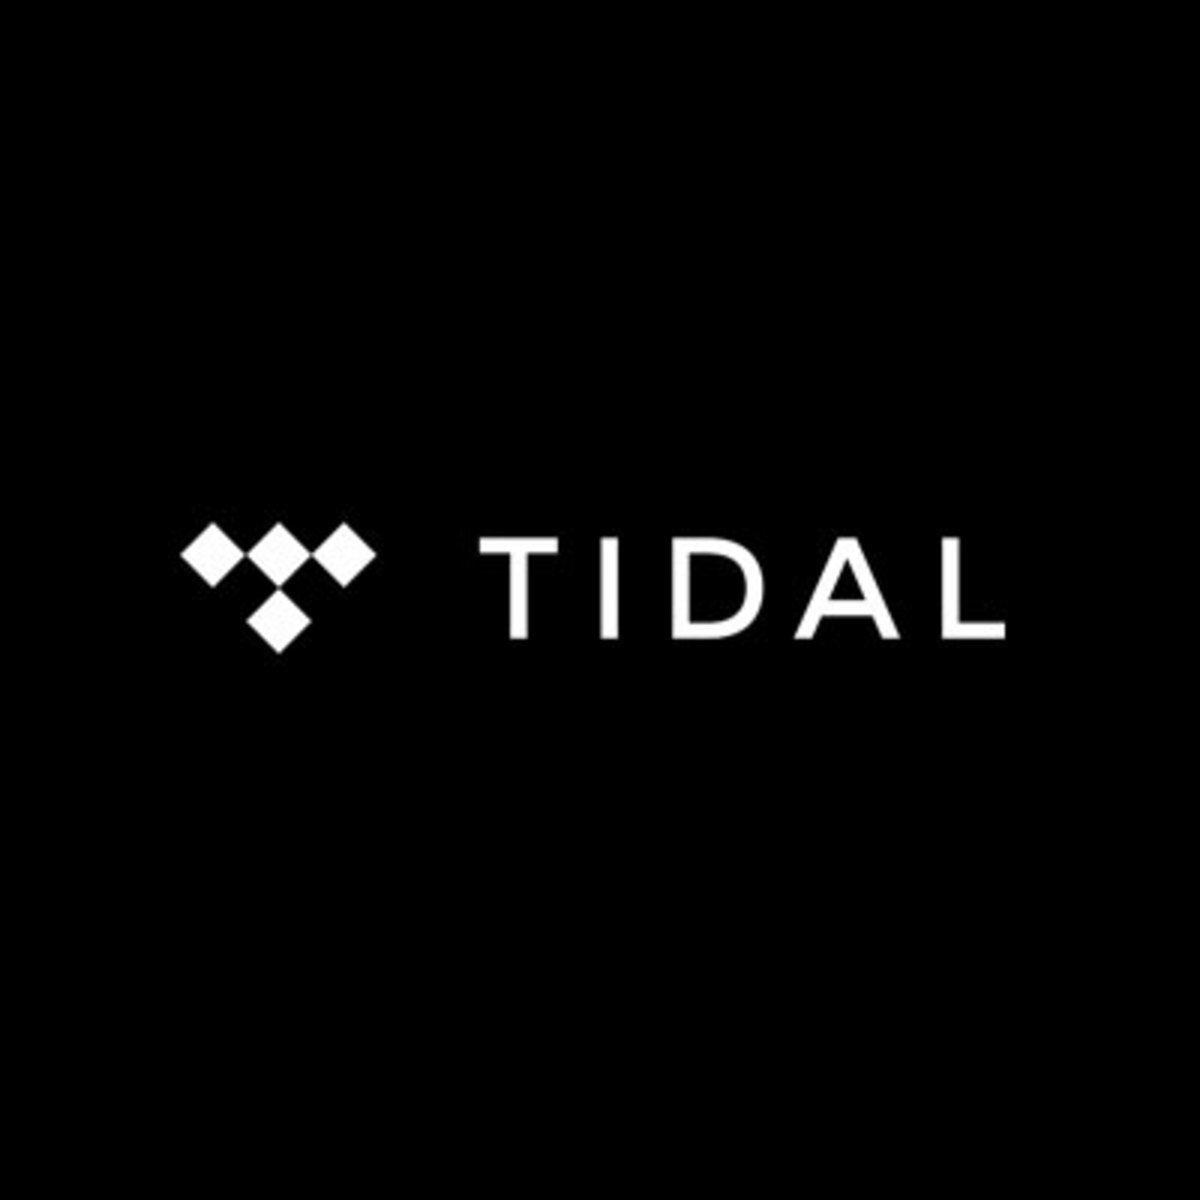 Tidal Logo - TIDAL to Expand Beyond Music with Comedy & Drama Video Projects ...